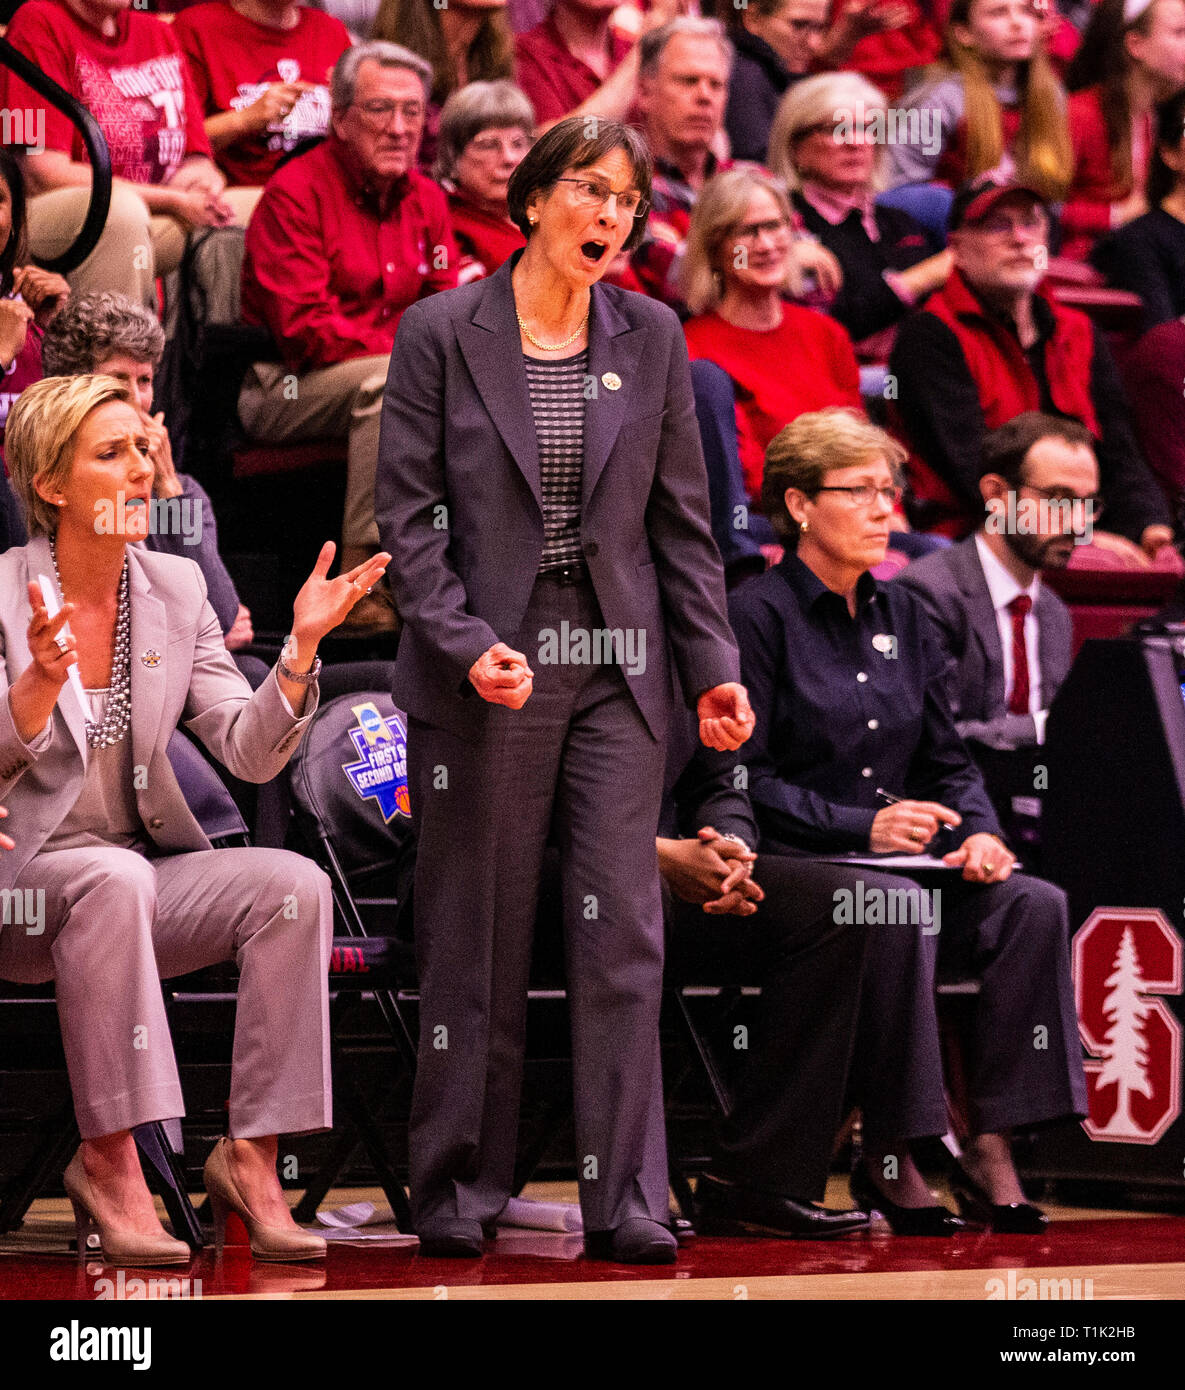 Stanford, CA, USA. 25th Mar, 2019. A. Stanford head coach Tara VanDerveer during the NCAA Women's Basketball Championship Second Round between the BYU Cougars and the Stanford Cardinal 72-63 win at Maples Pavilion Stanford, CA. Thurman James /CSM/Alamy Live News Stock Photo